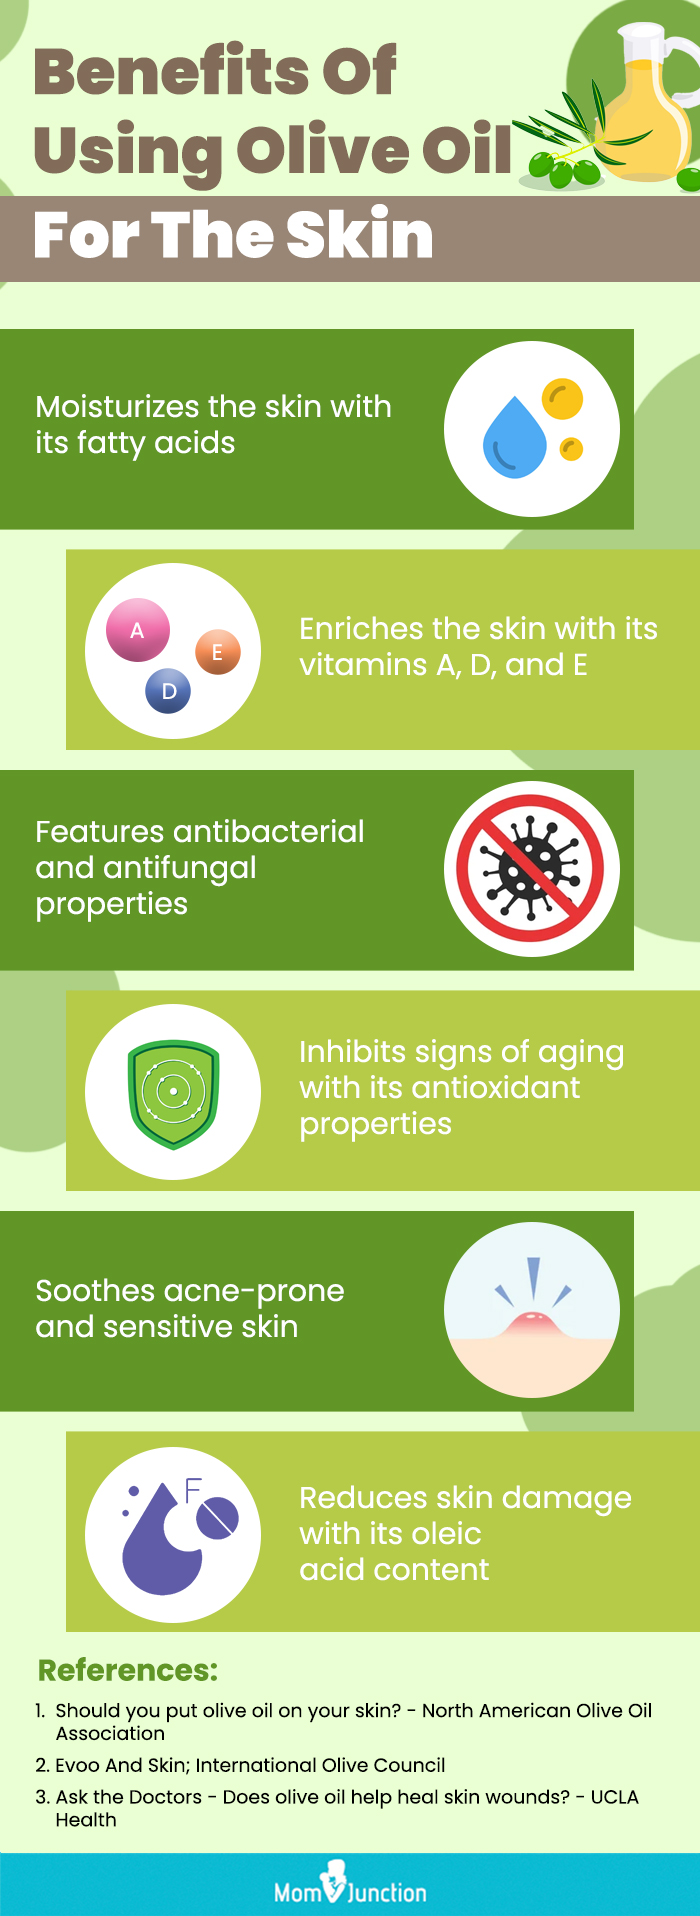 Benefits Of Using Olive Oil For The Skin (infographic)